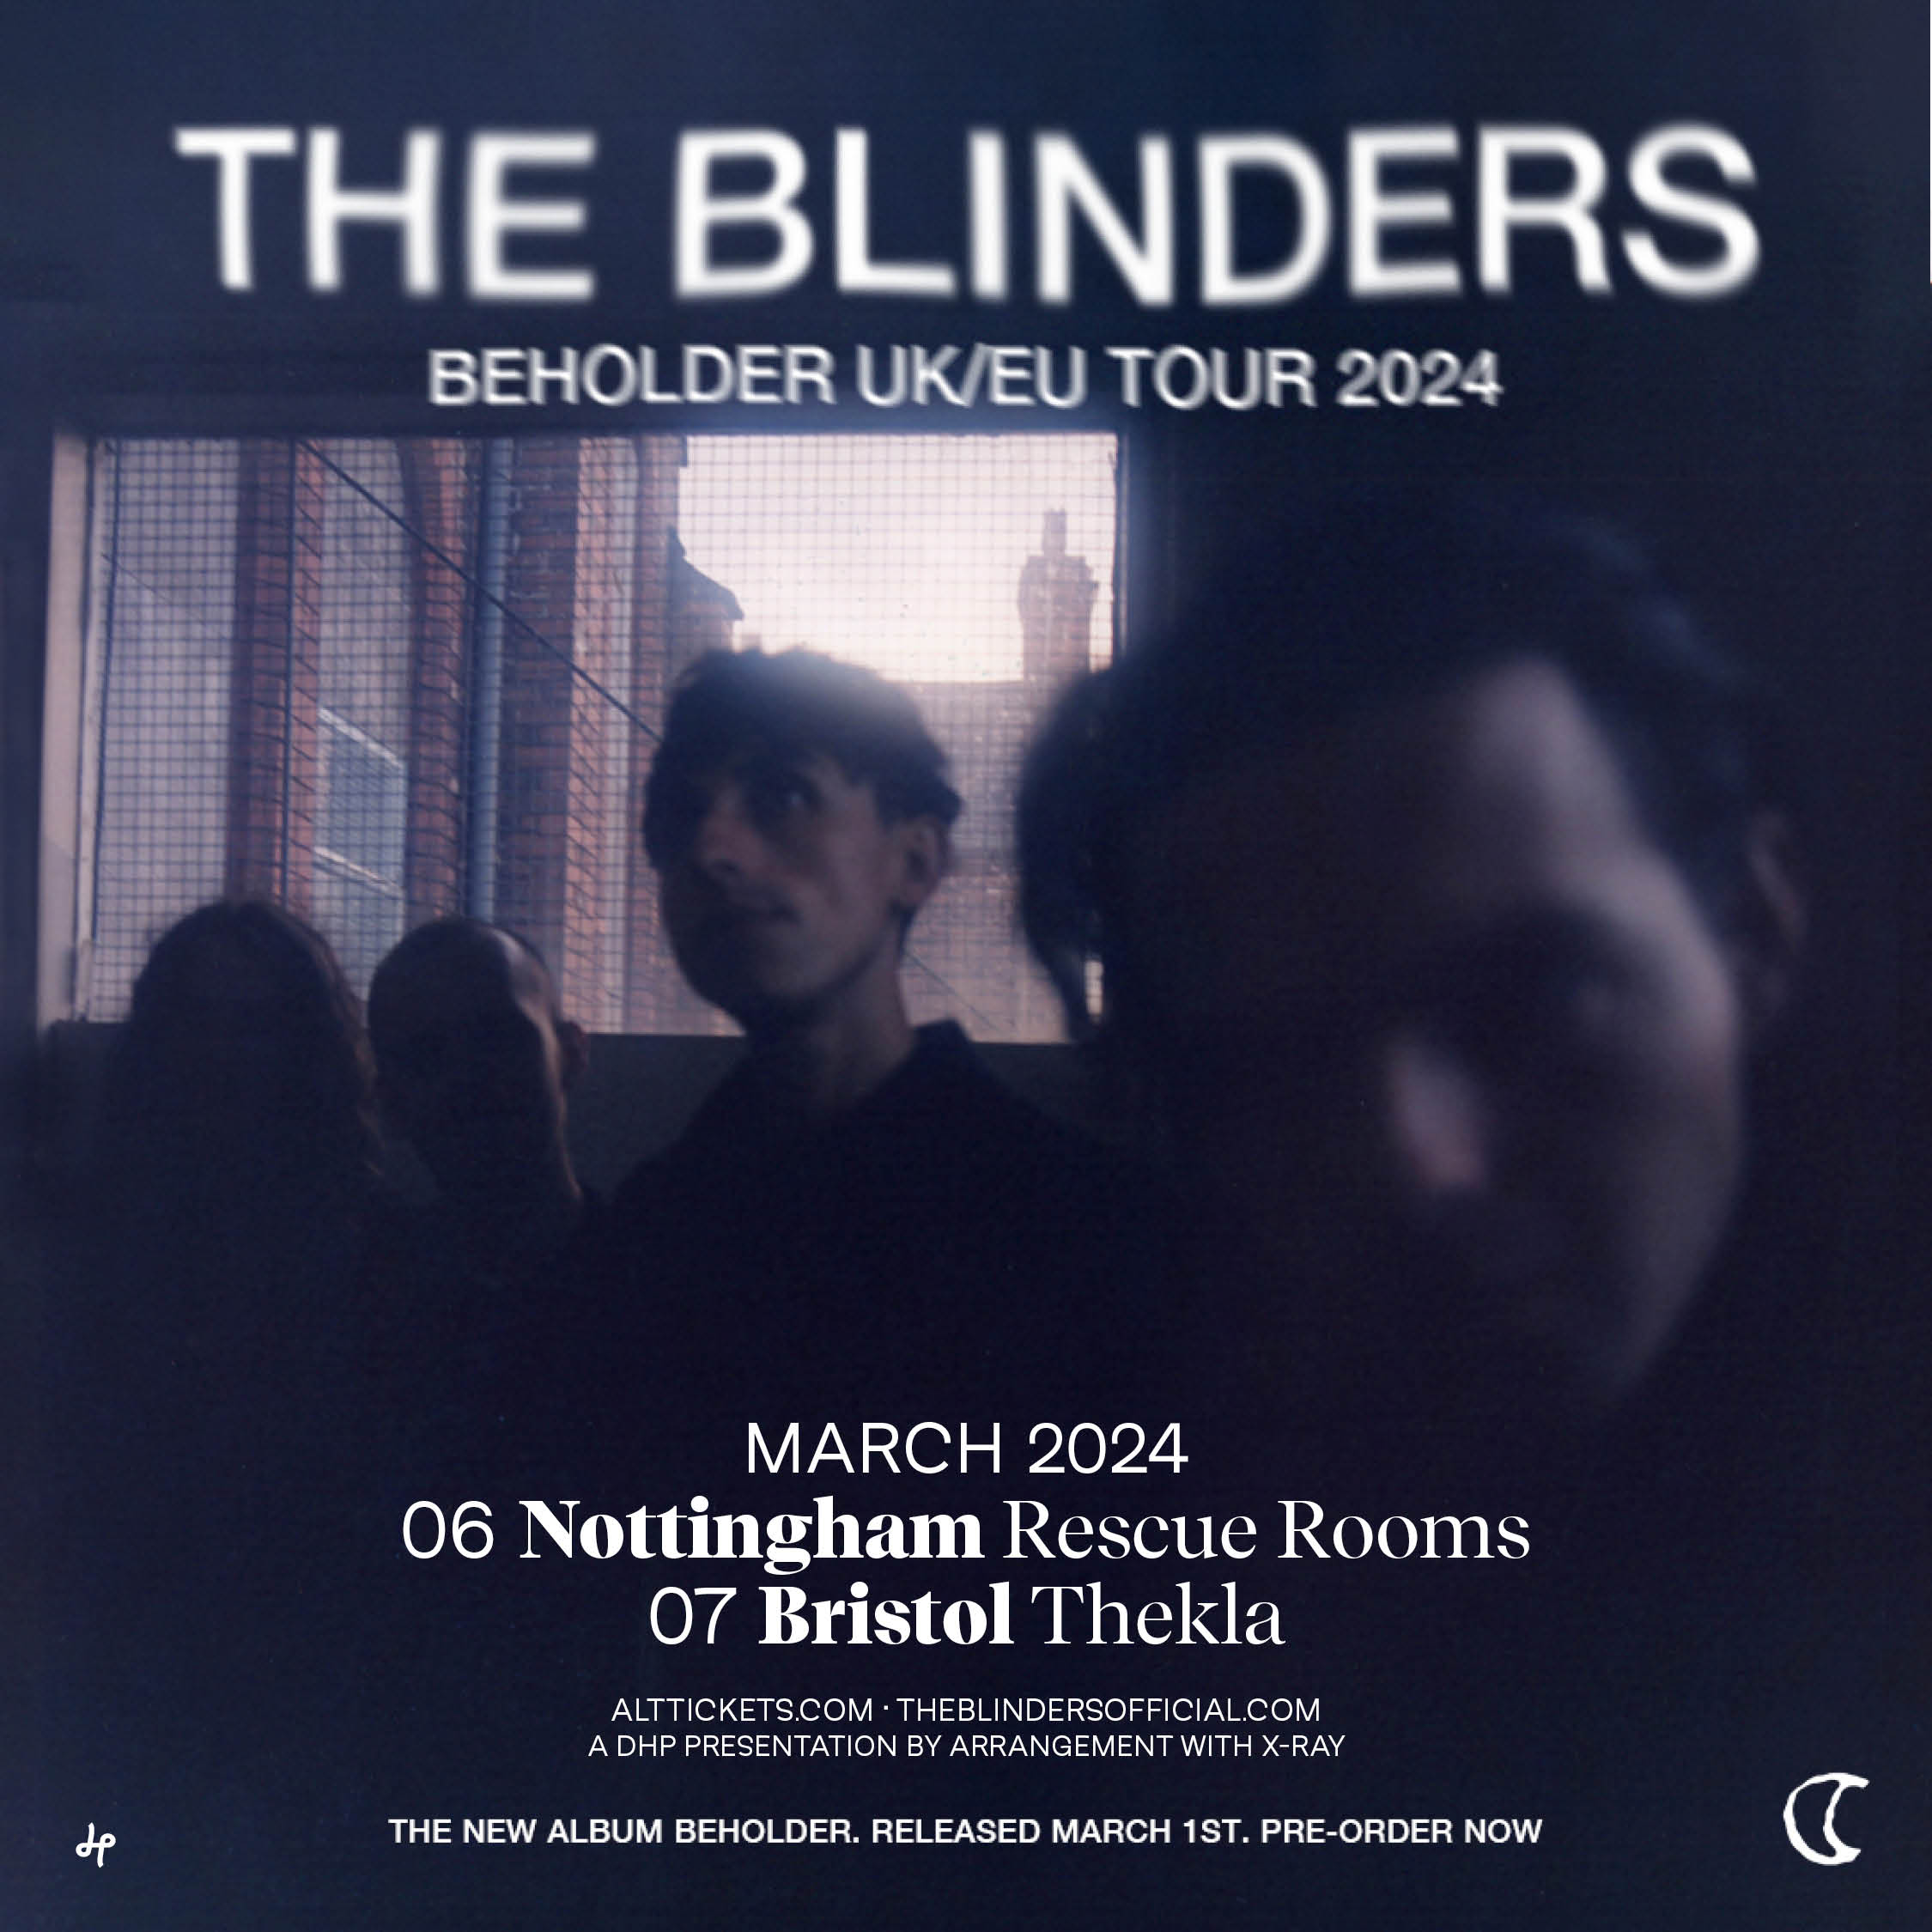 THE BLINDERS POSTER